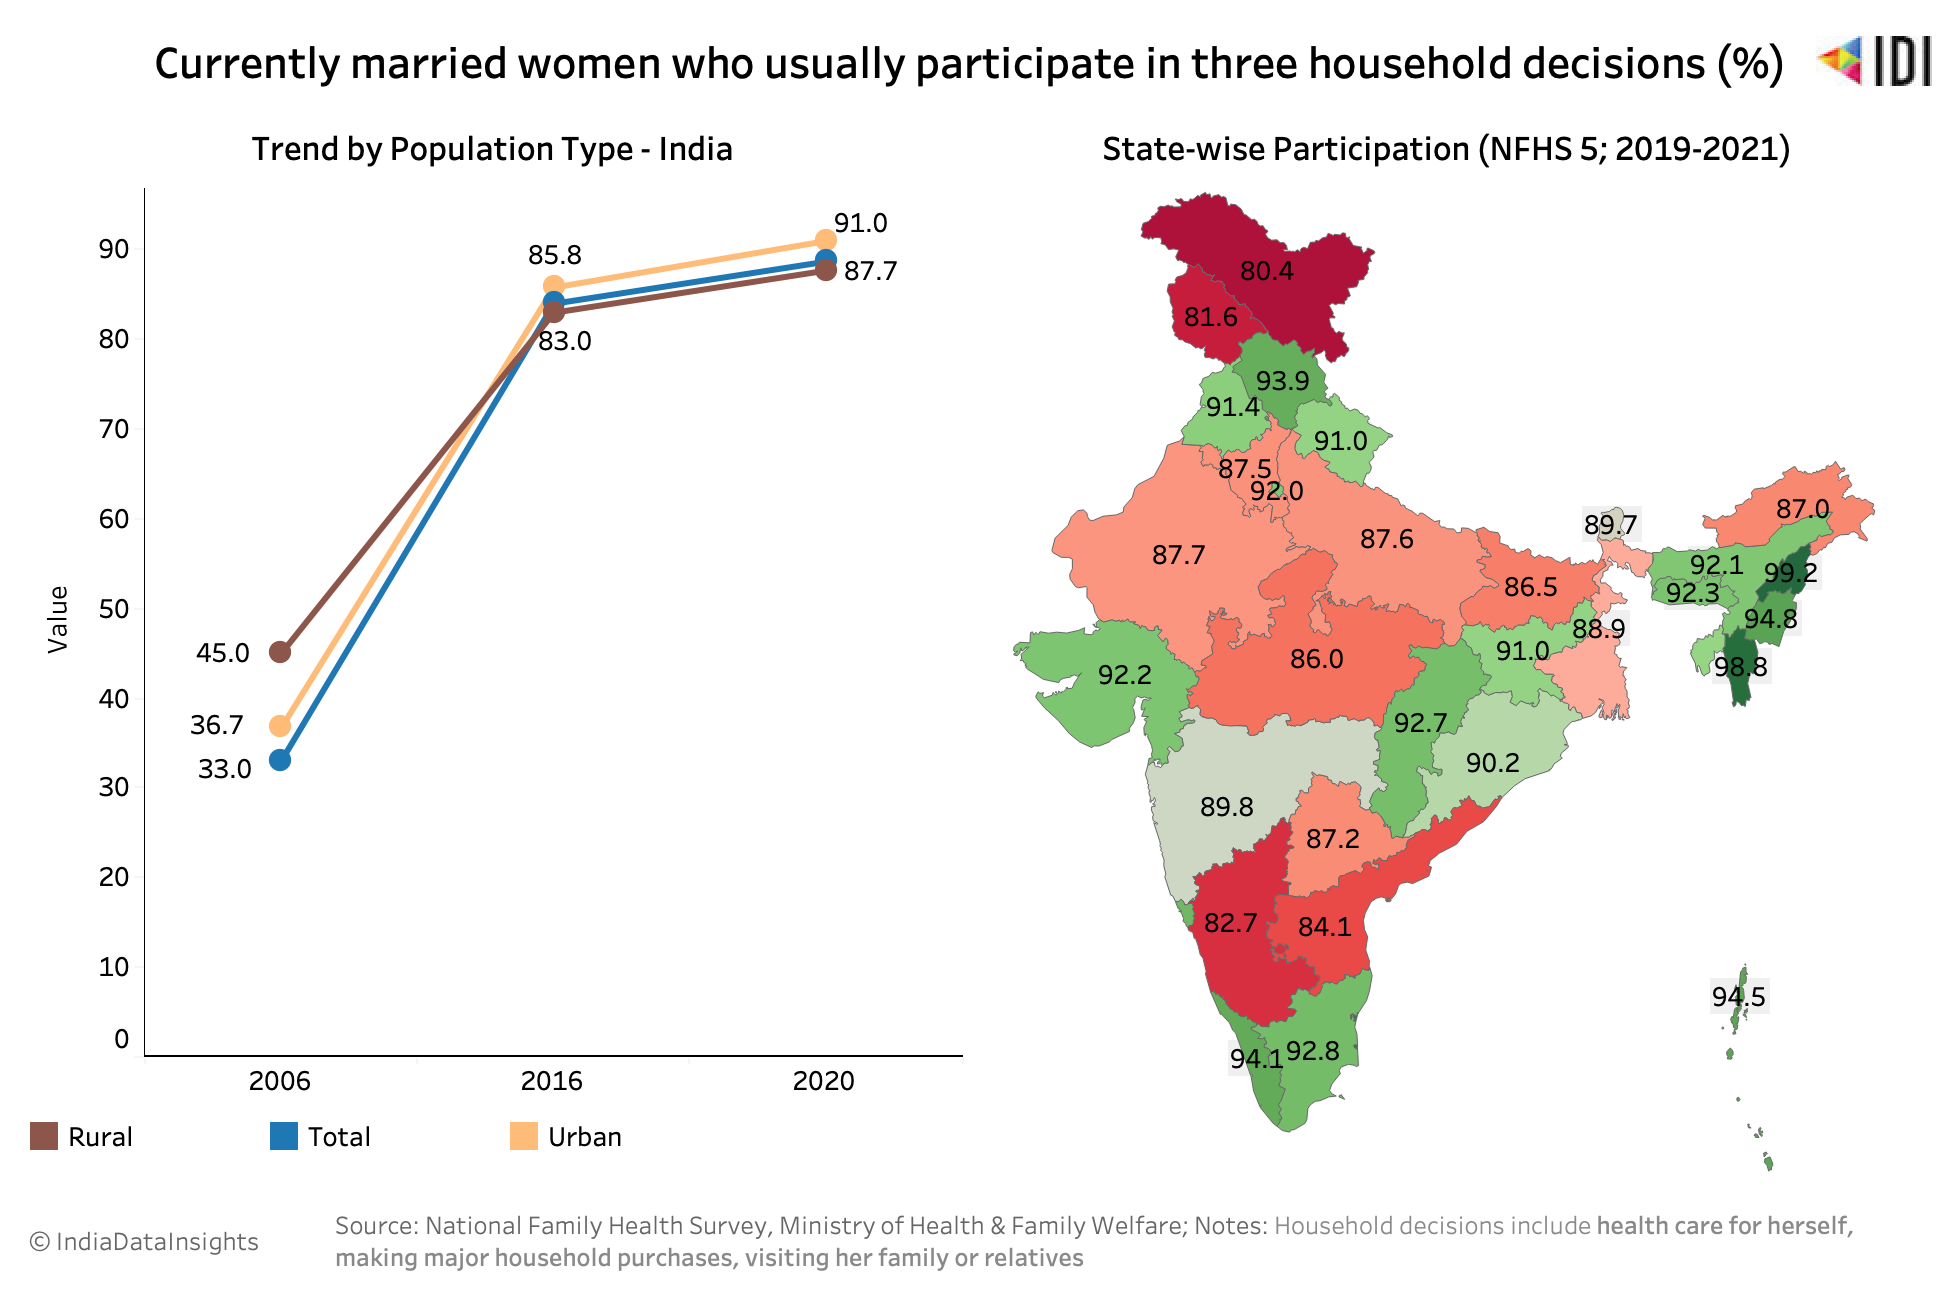 Married women in India taking household decisions